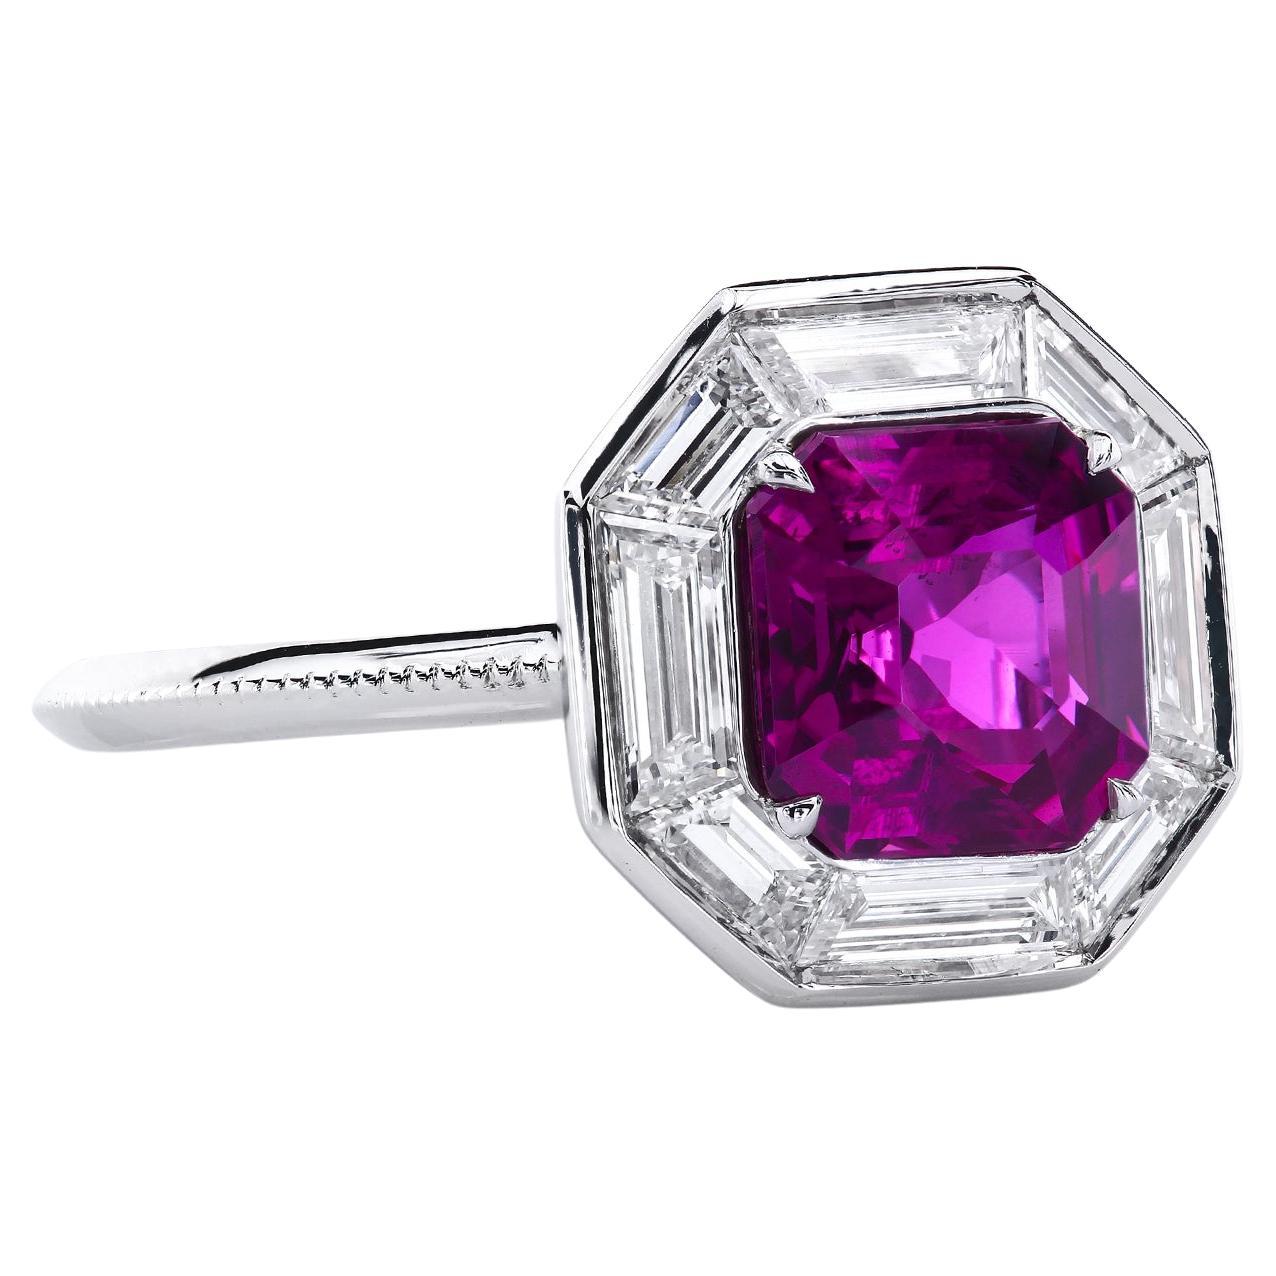 Leon Mege platinum ring with natural hot-pink sapphire and diamond daguettes For Sale